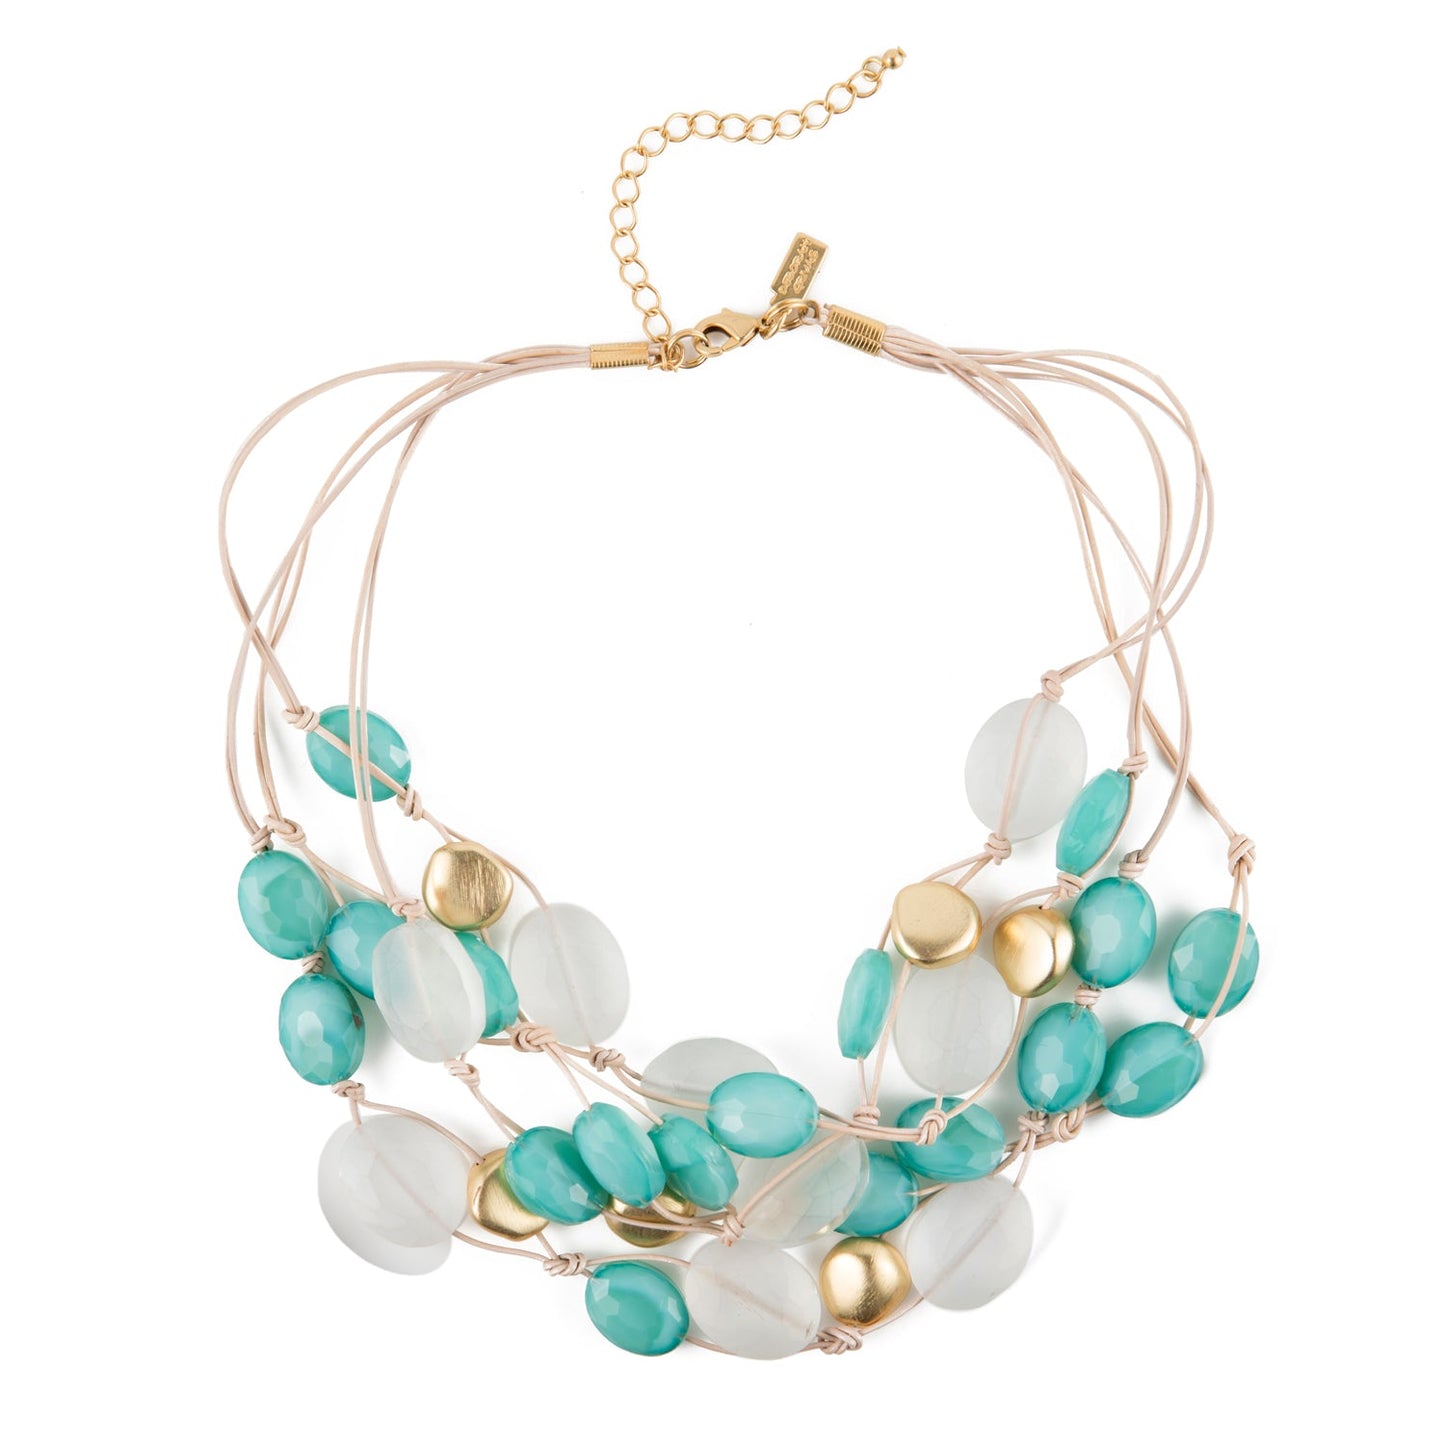 Matte White Crystal,Aqua Velvet Crystal And Matte Gold Pebble Beads Putty Leather Cluster Necklace